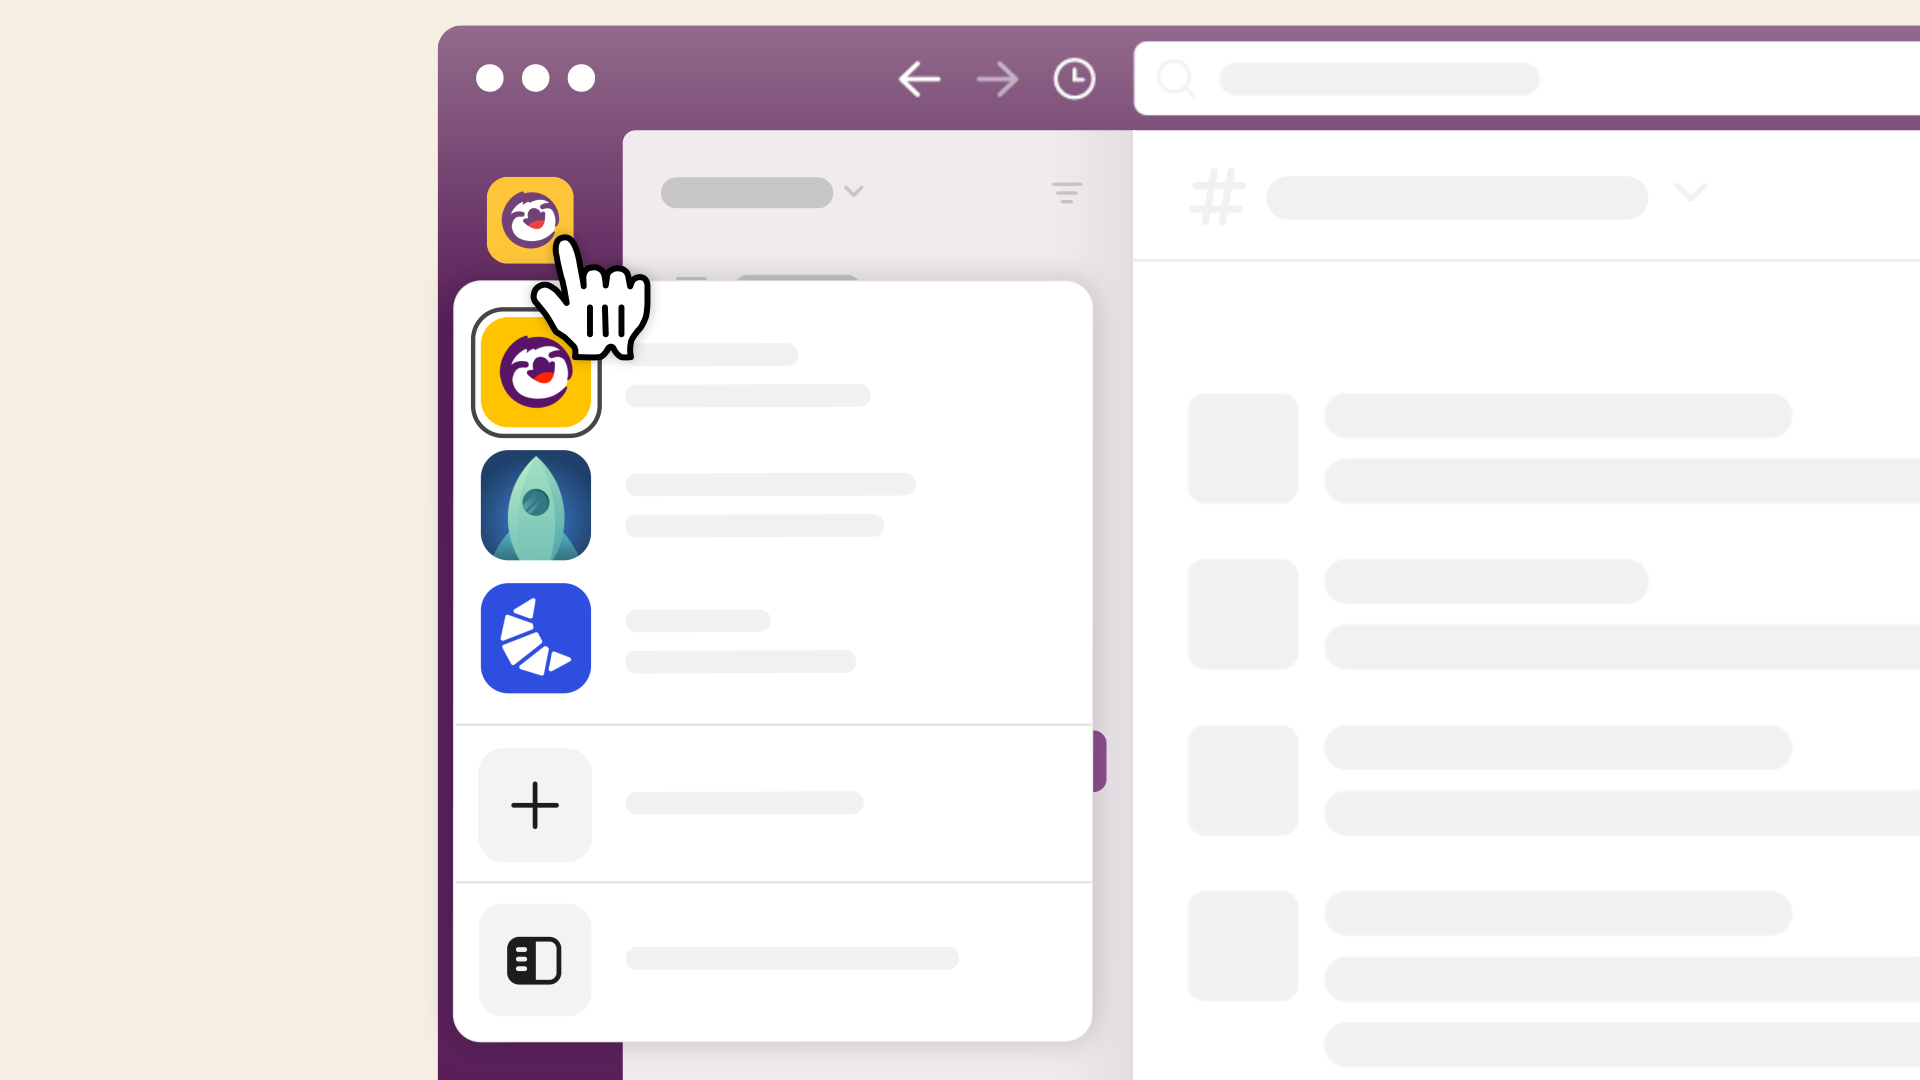 A static image of a cursor hovering over the workspace icon in the Slack desktop app